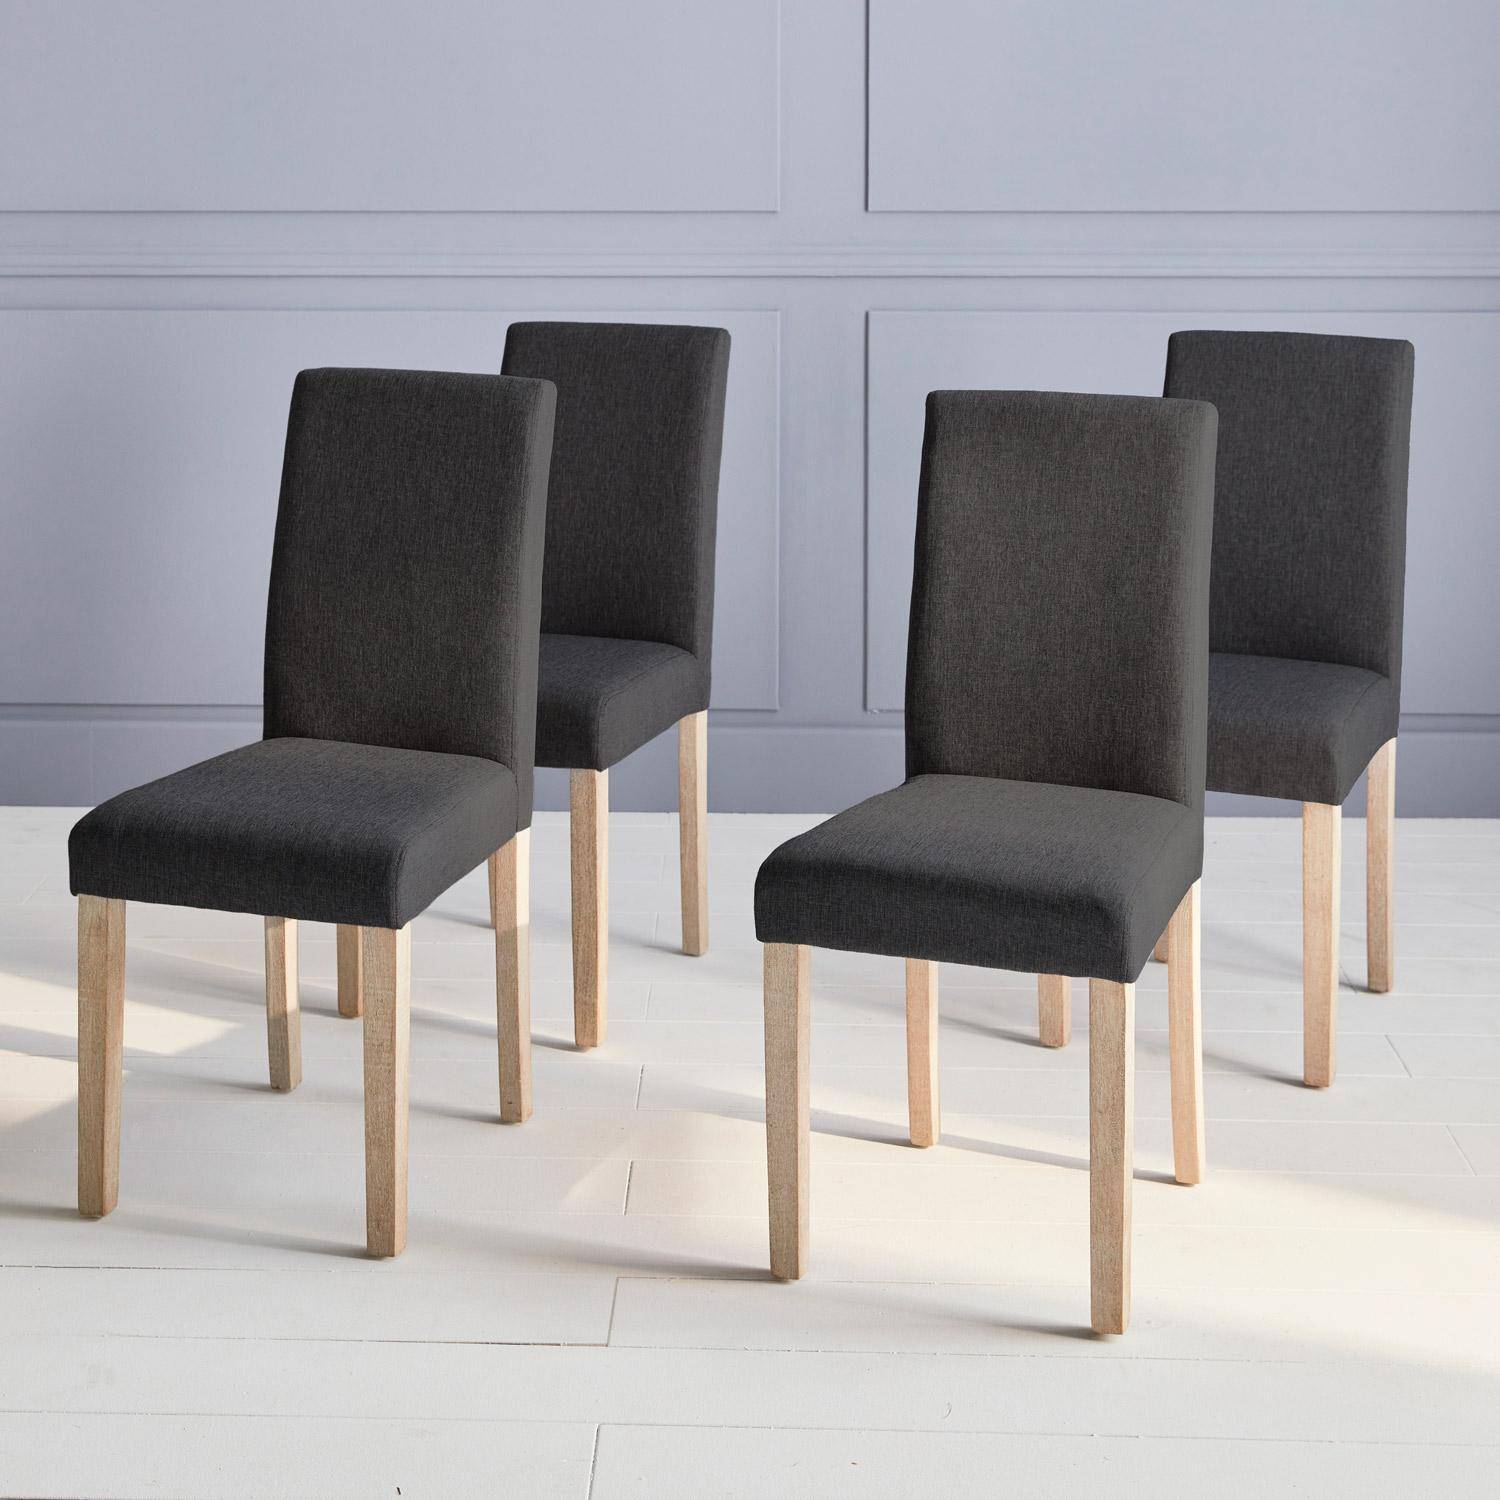 Set of 4 fabric dining chairs with wooden legs - Rita - Charcoal grey,sweeek,Photo1